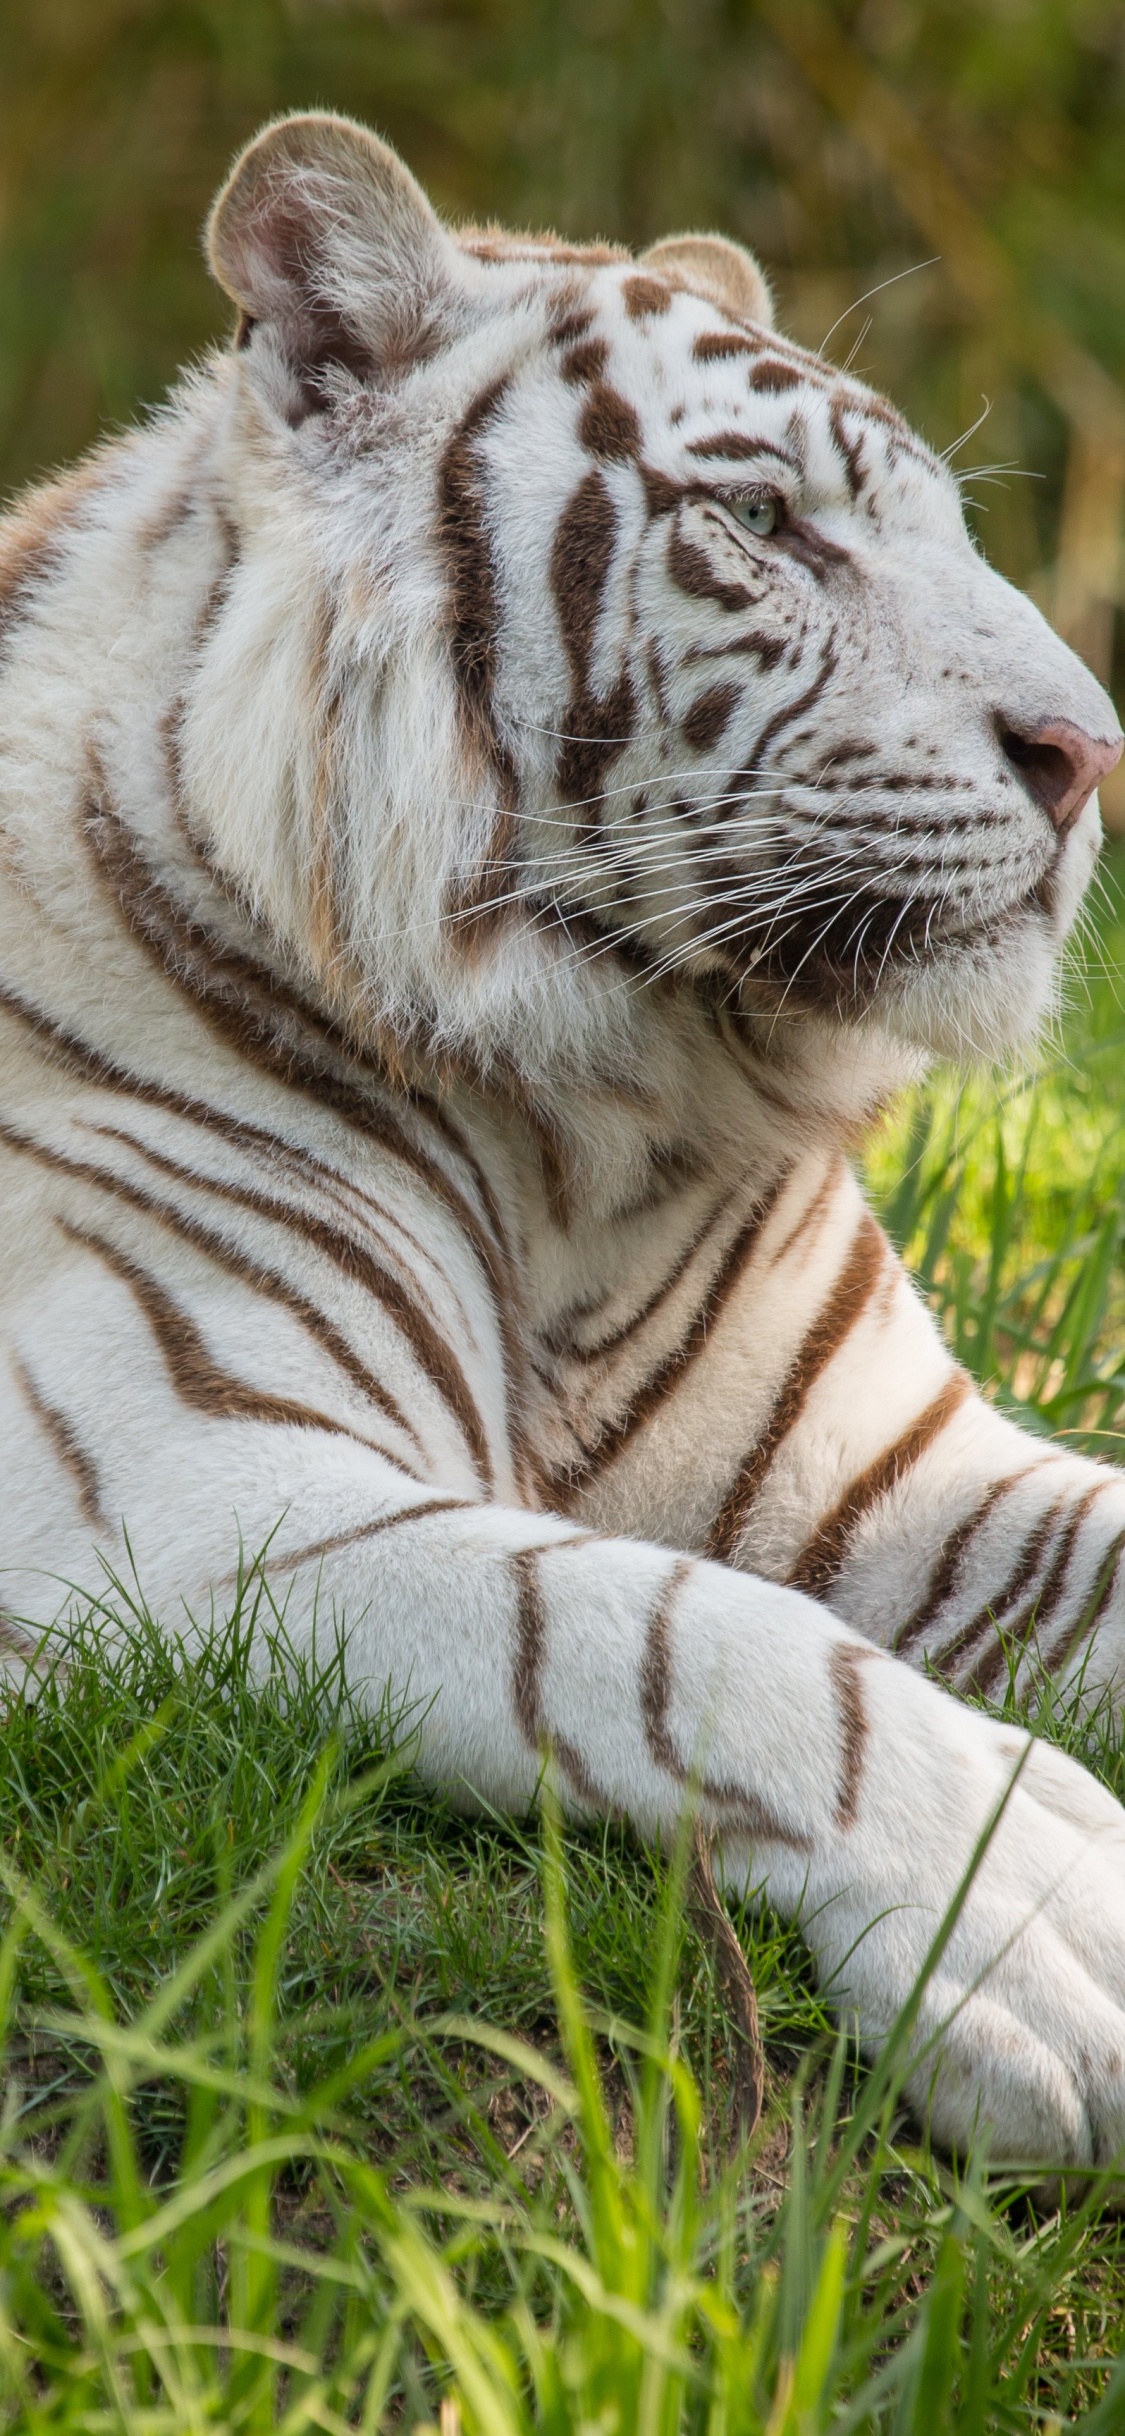 White and Black Tiger Lying on Green Grass During Daytime. Wallpaper in 1125x2436 Resolution